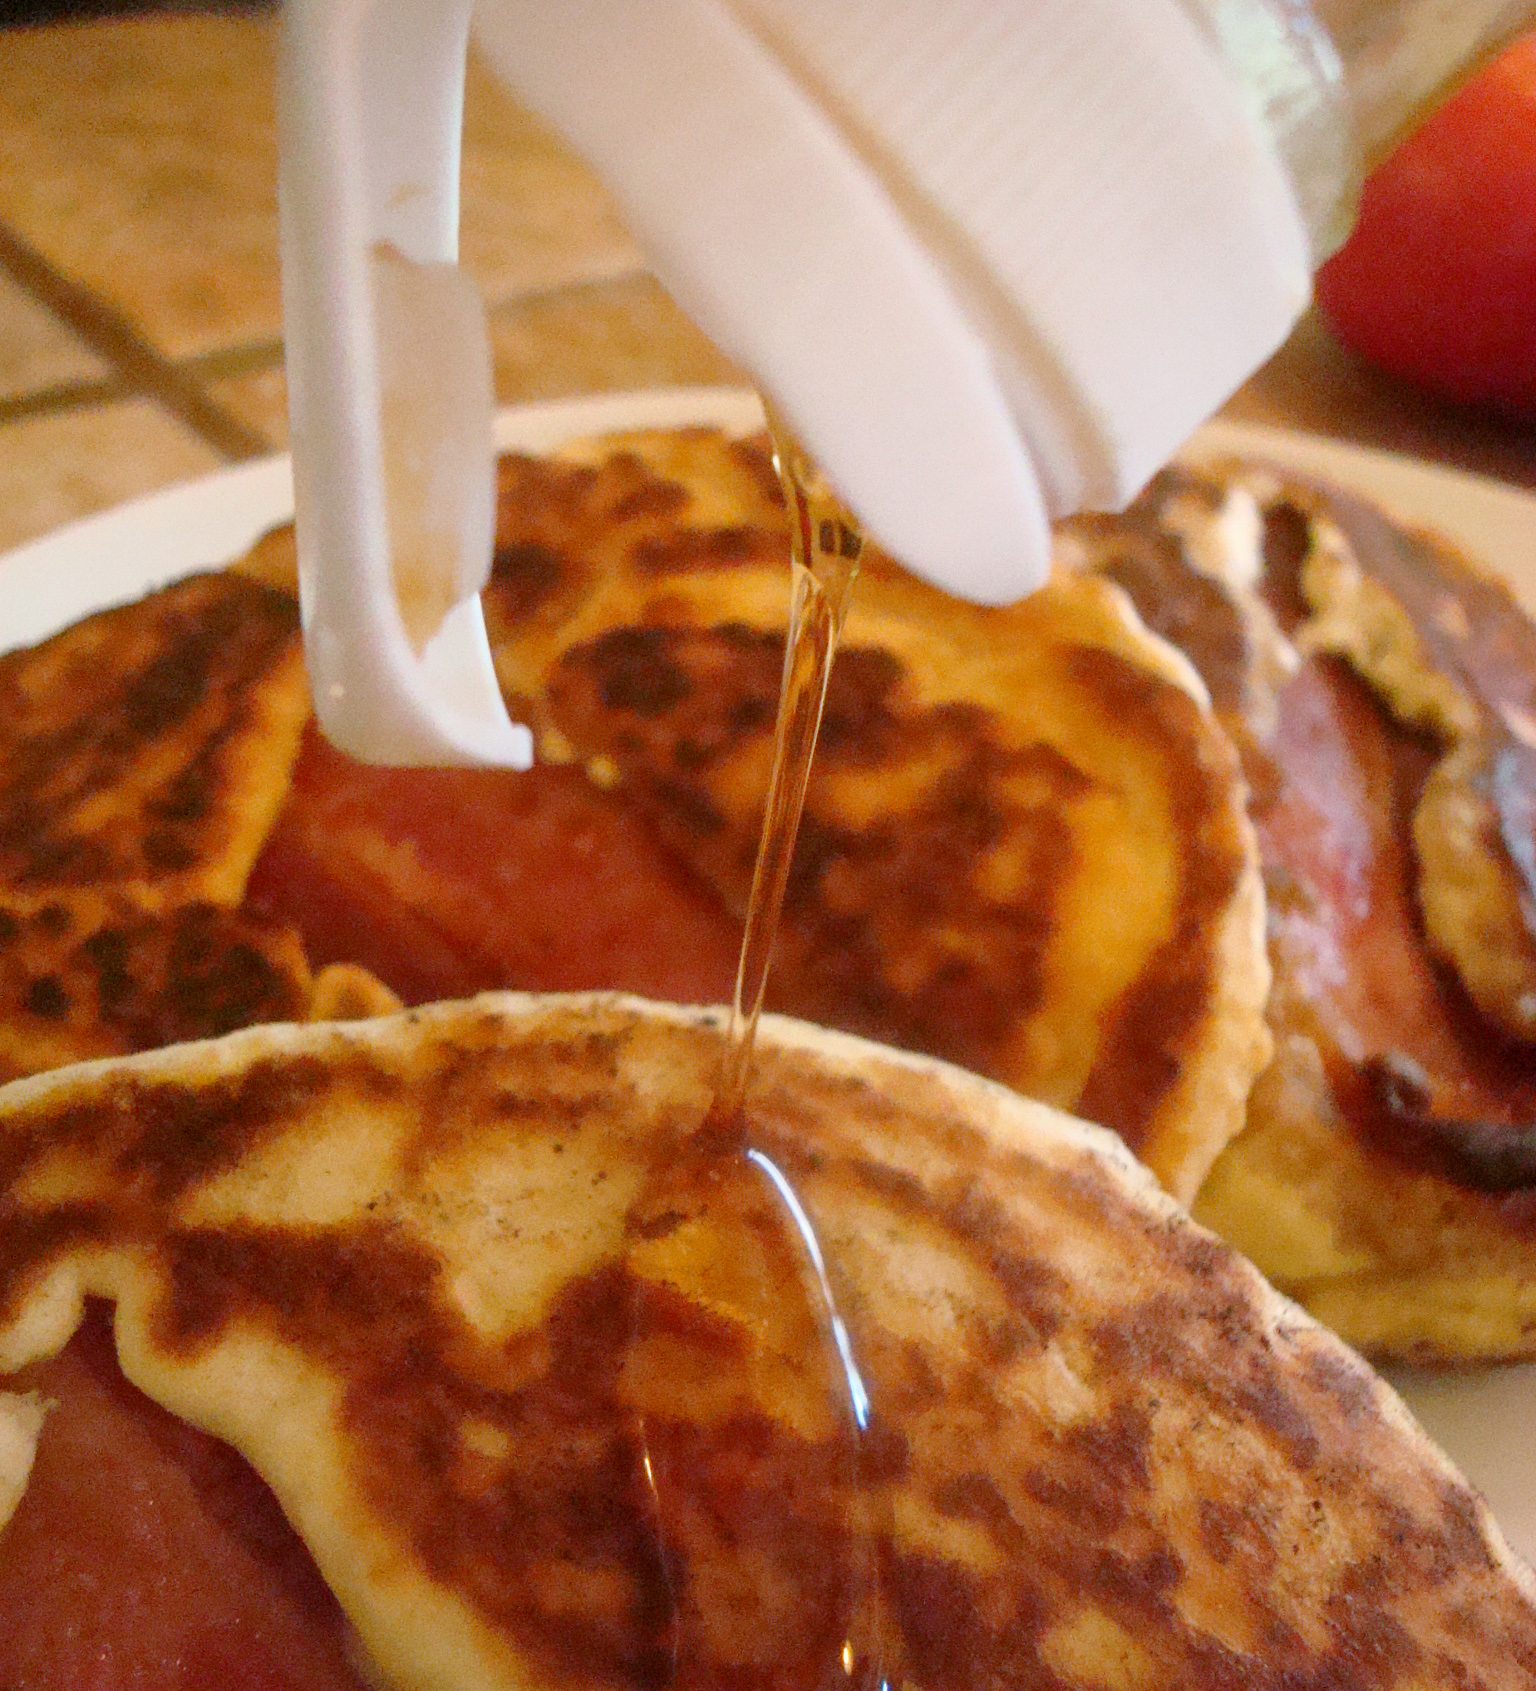 Syrup makes both pancakes and bacon better